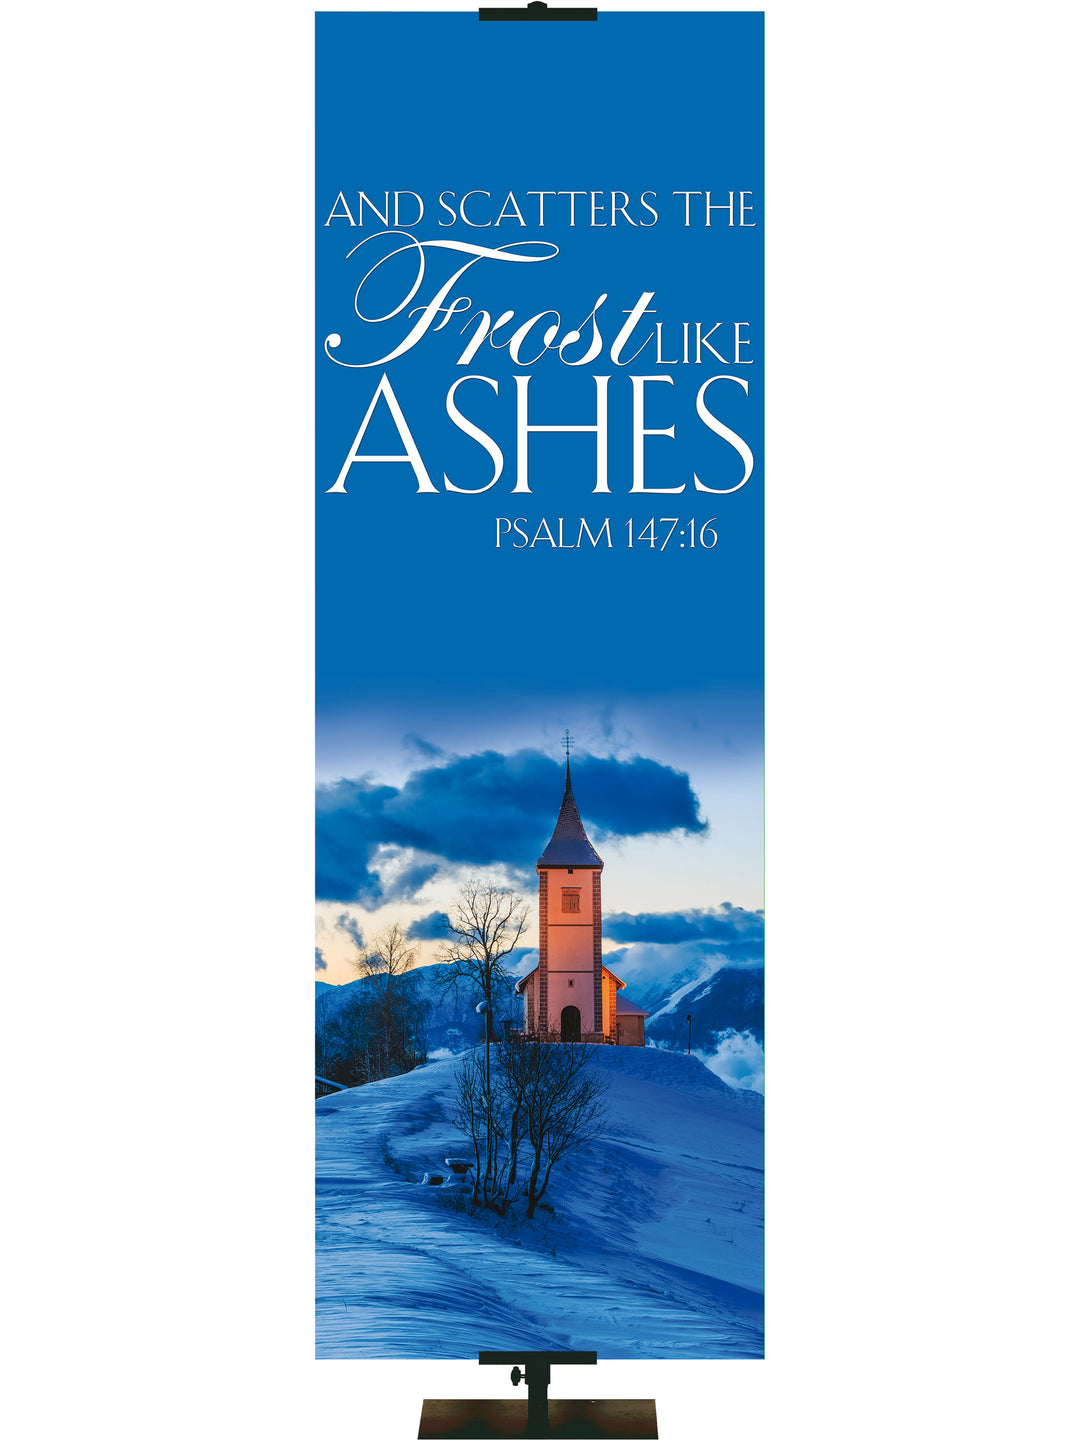 Portraits of Sacred Winter Frost like Ashes E - Christmas Banners - PraiseBanners